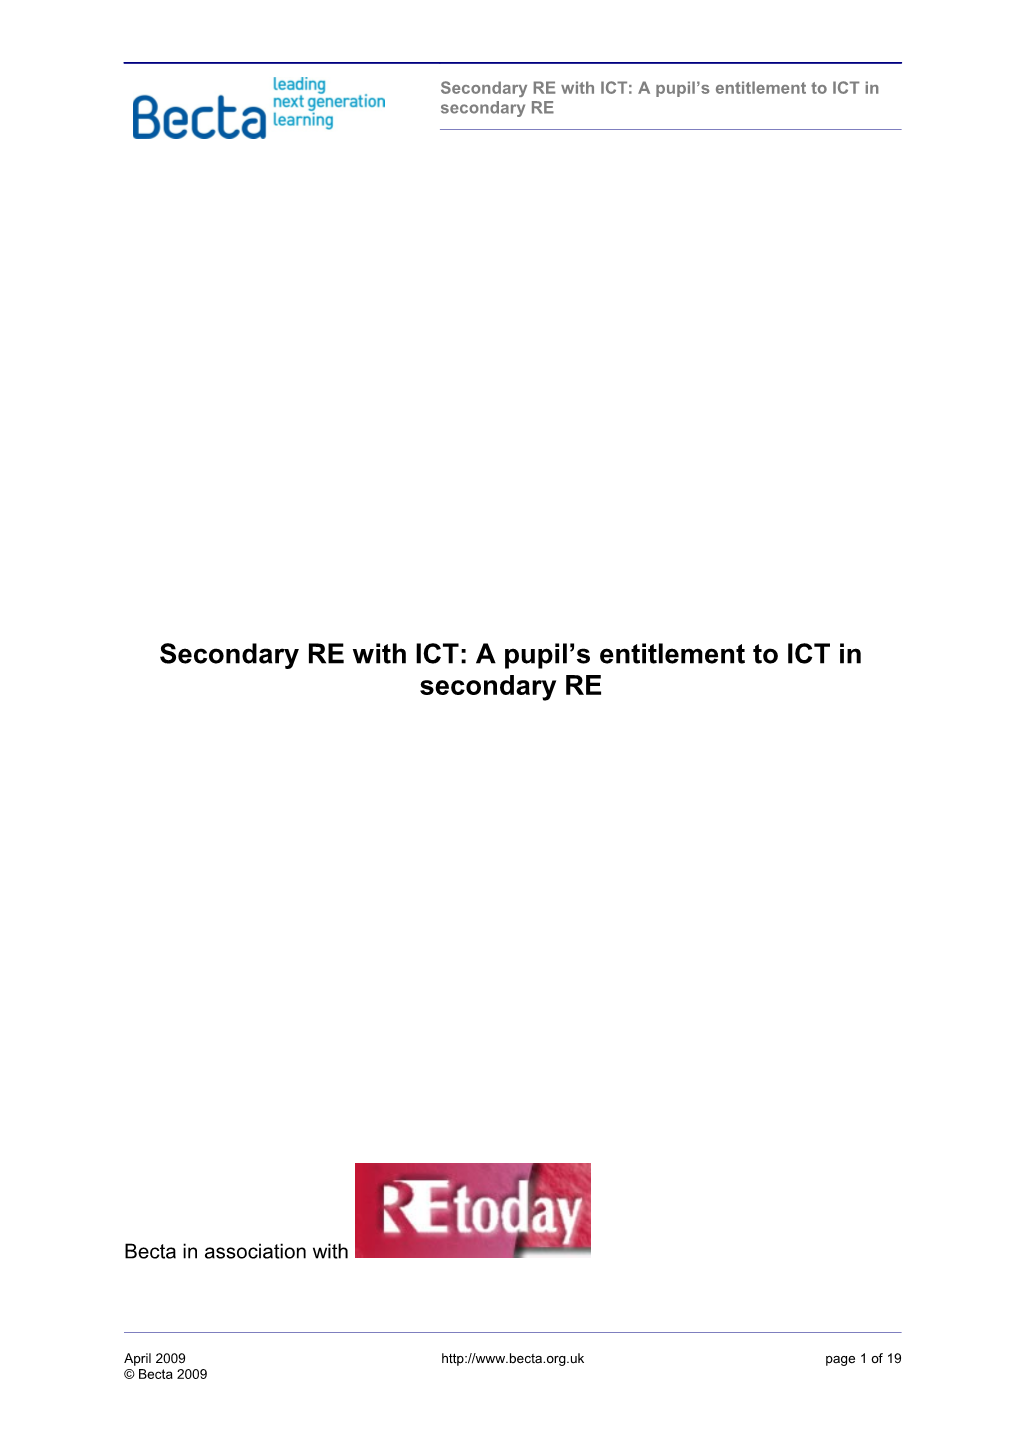 Secondary RE with ICT: a Pupil S Entitlement to ICT in Secondary RE